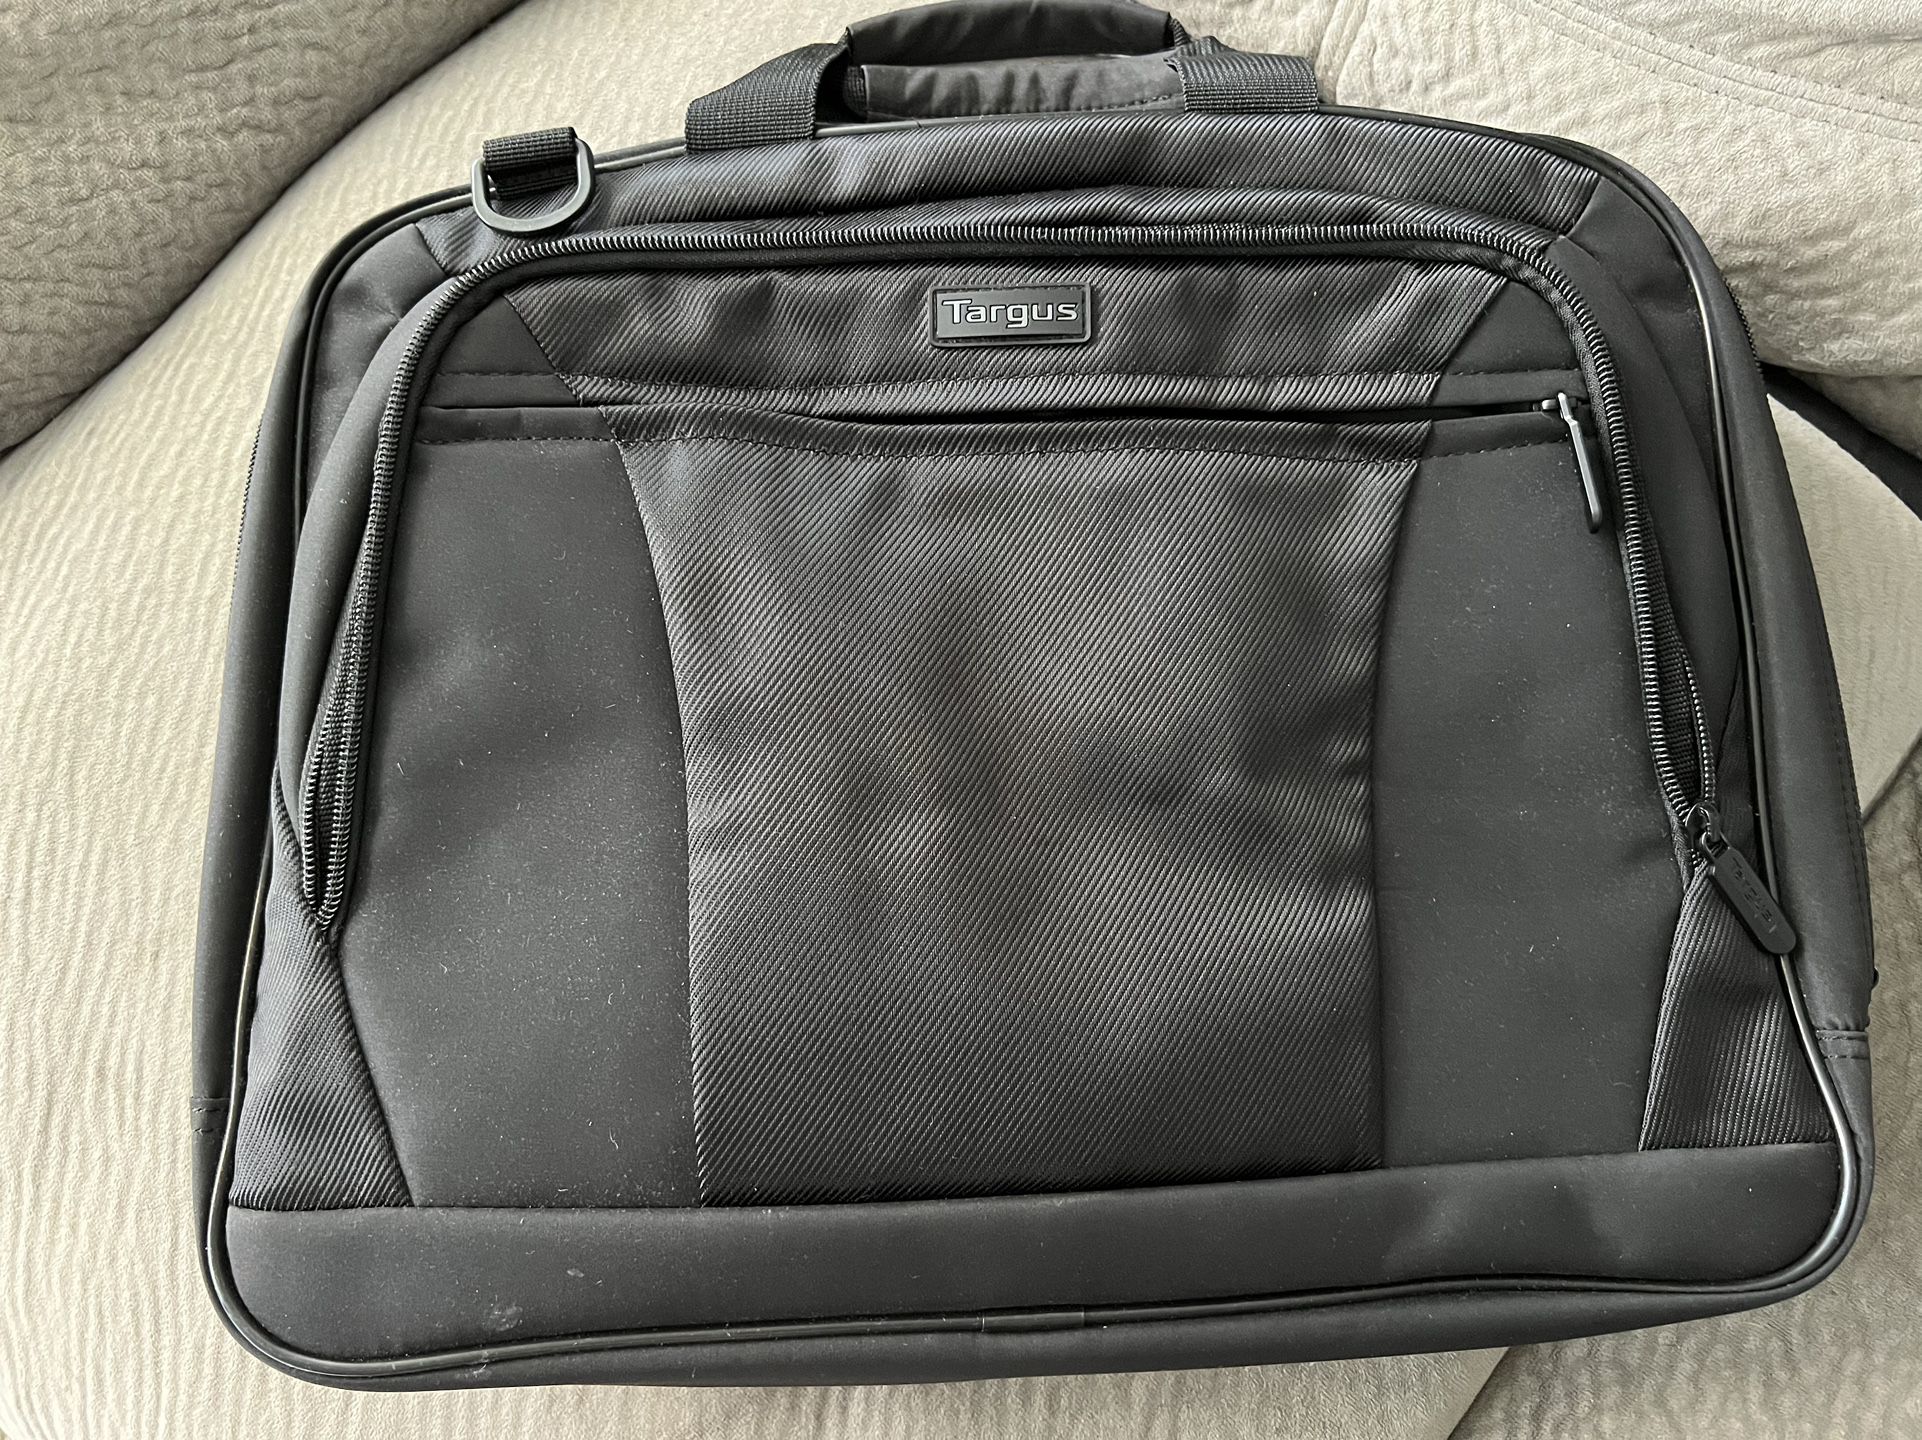 Targus Laptop Bag - “LIKE NEW” - PICKUP IN AIEA - I DON’T DELIVER 